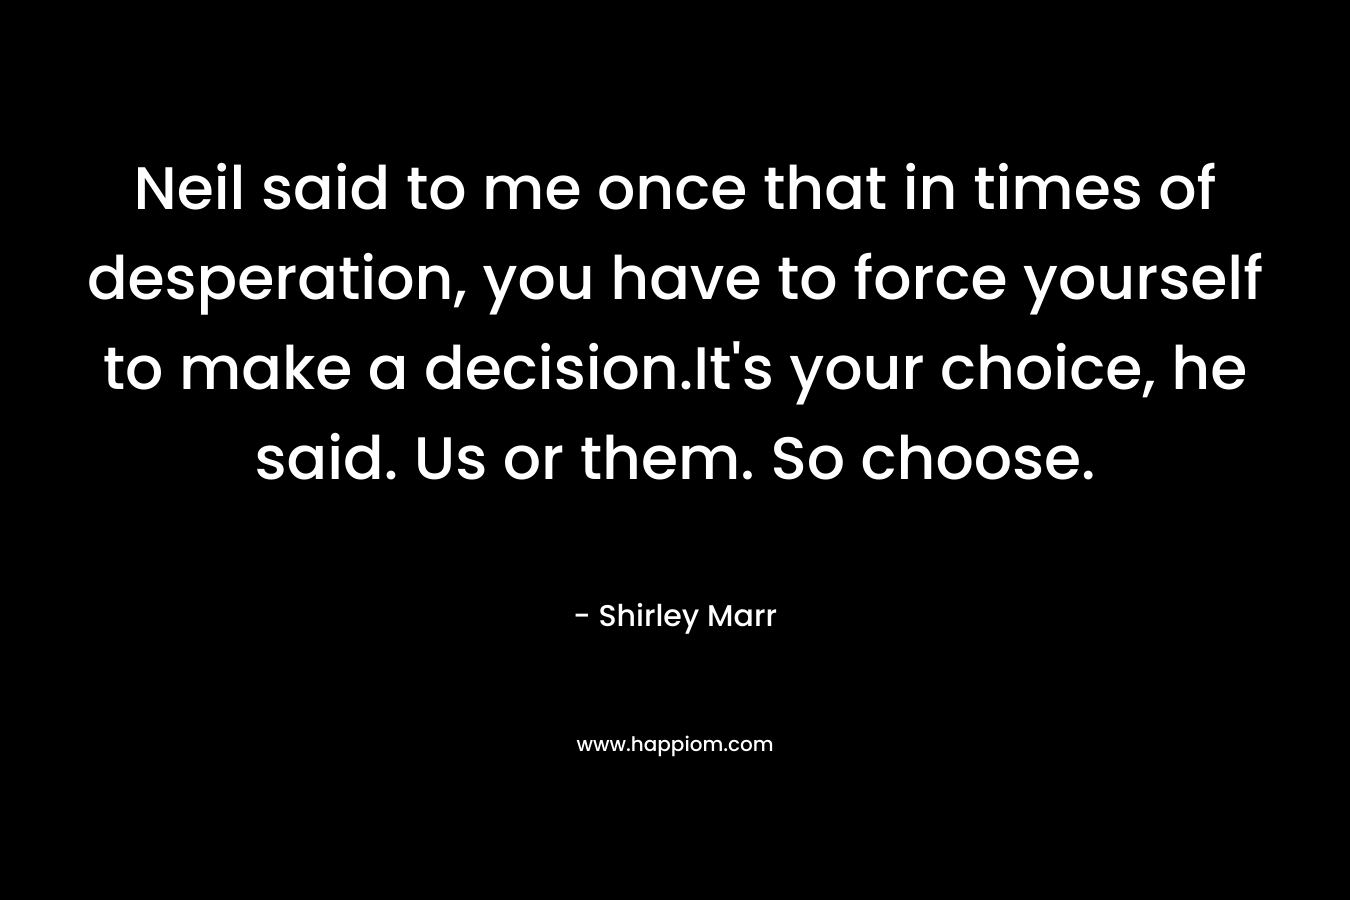 Neil said to me once that in times of desperation, you have to force yourself to make a decision.It’s your choice, he said. Us or them. So choose. – Shirley Marr